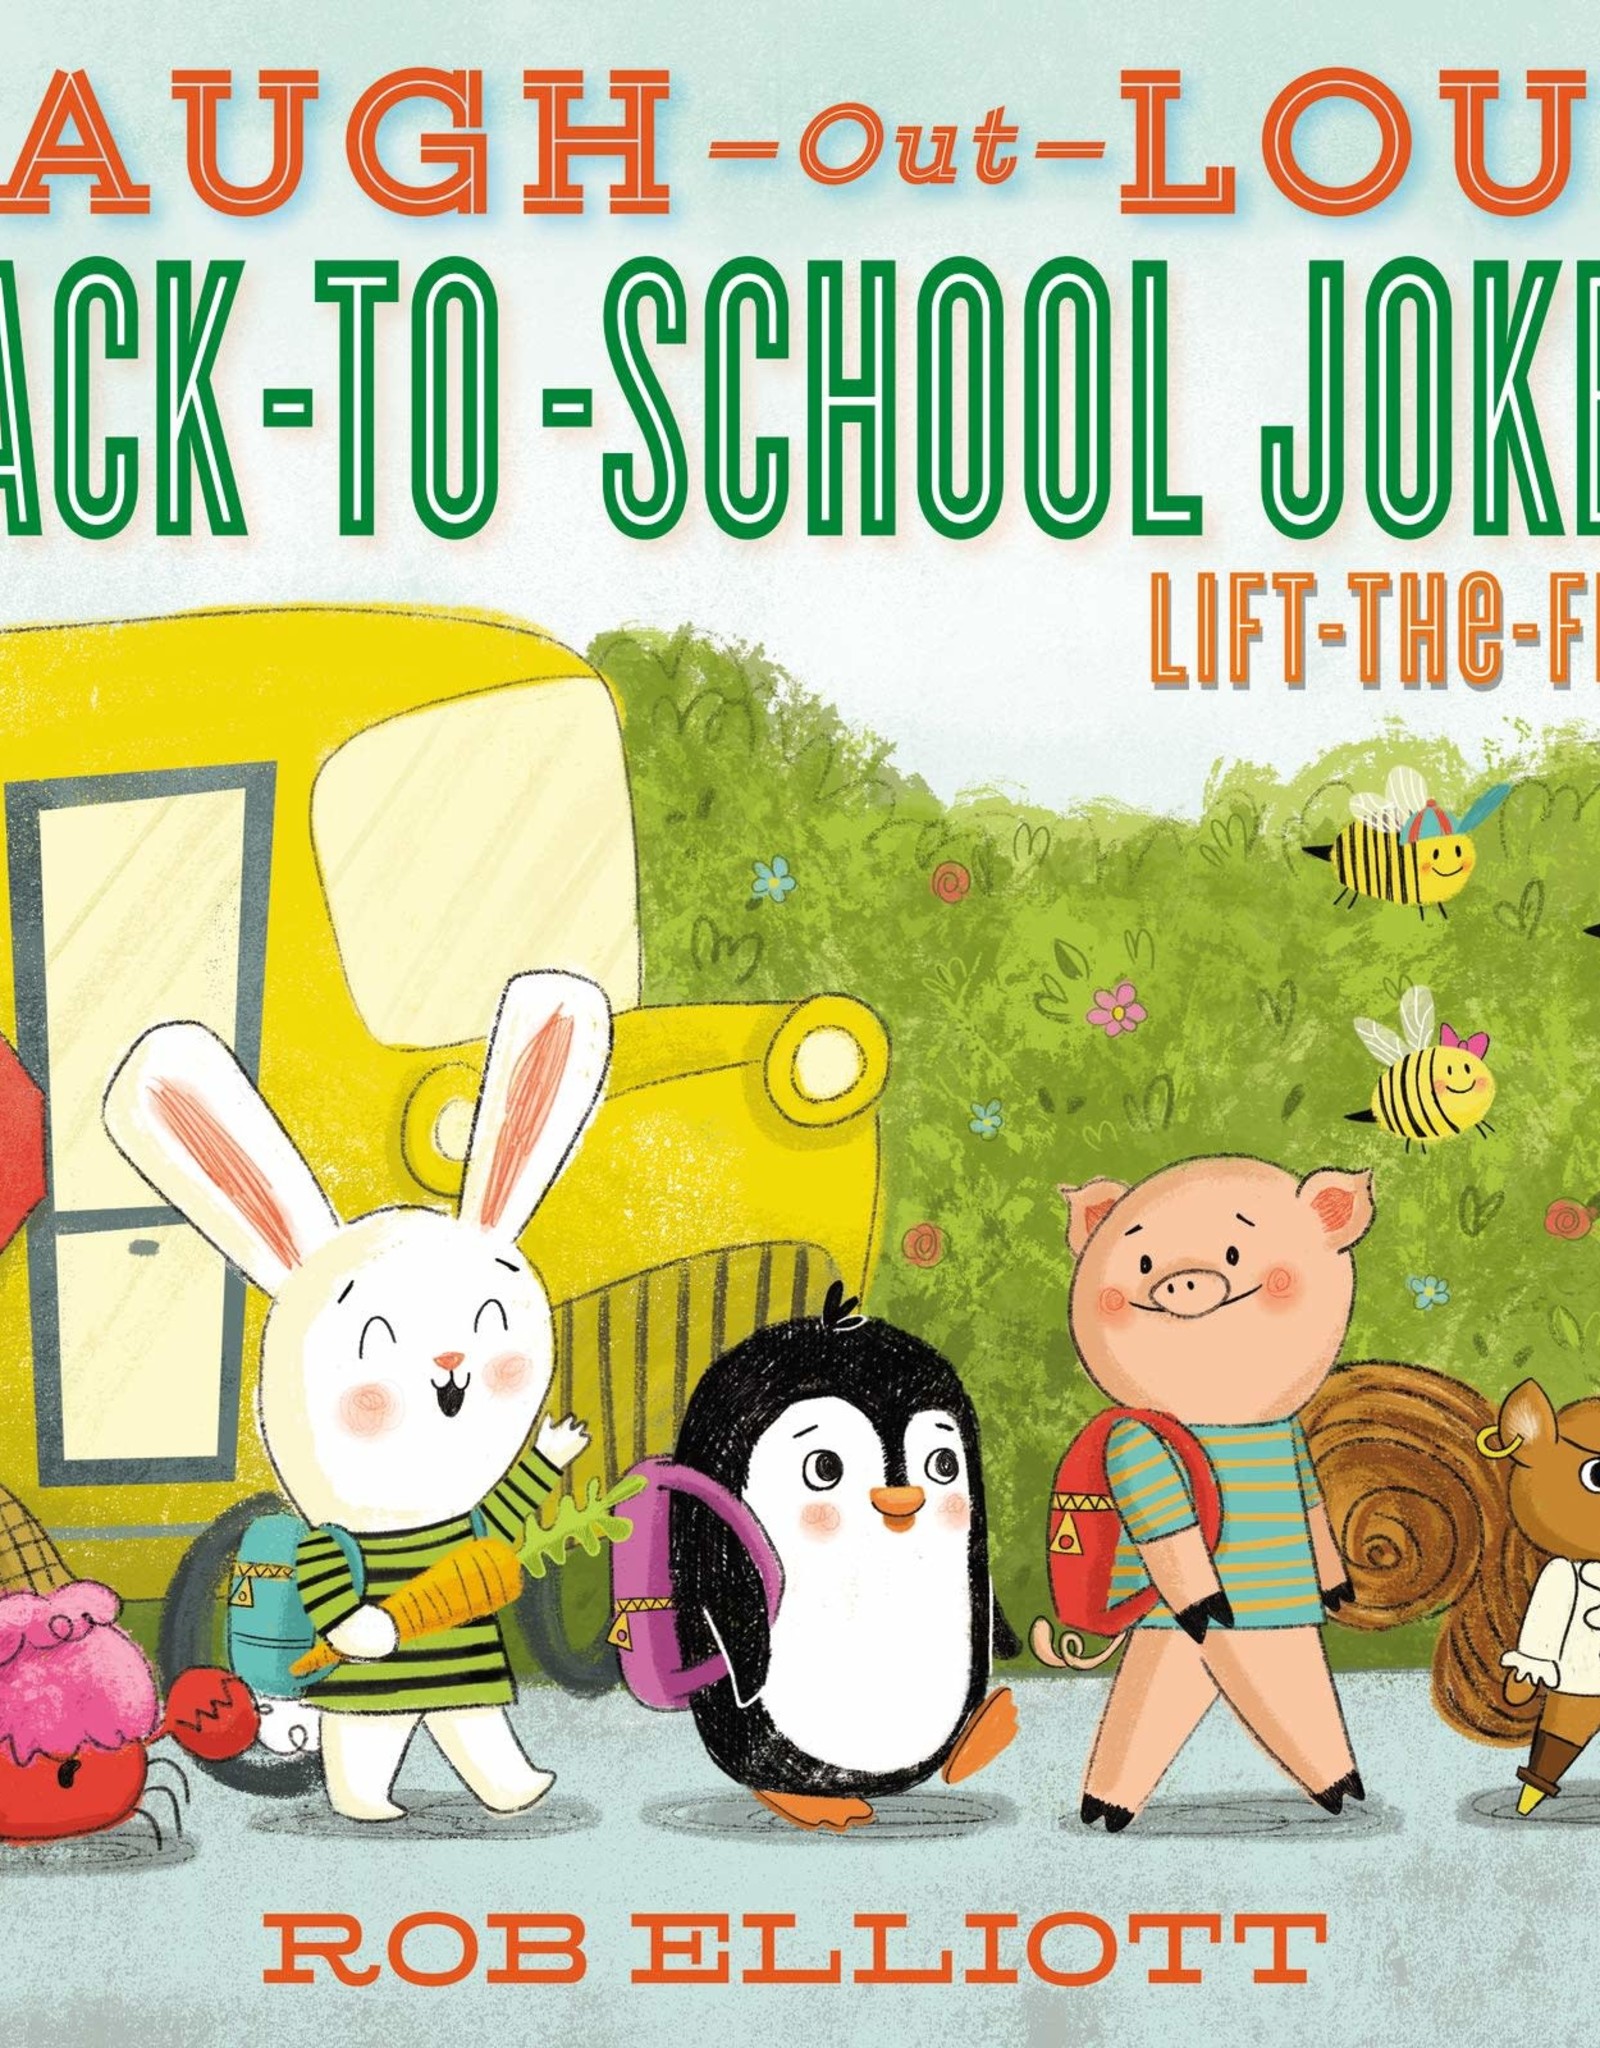 Laugh-Out-Loud Back to School Lift the Flap Jokes